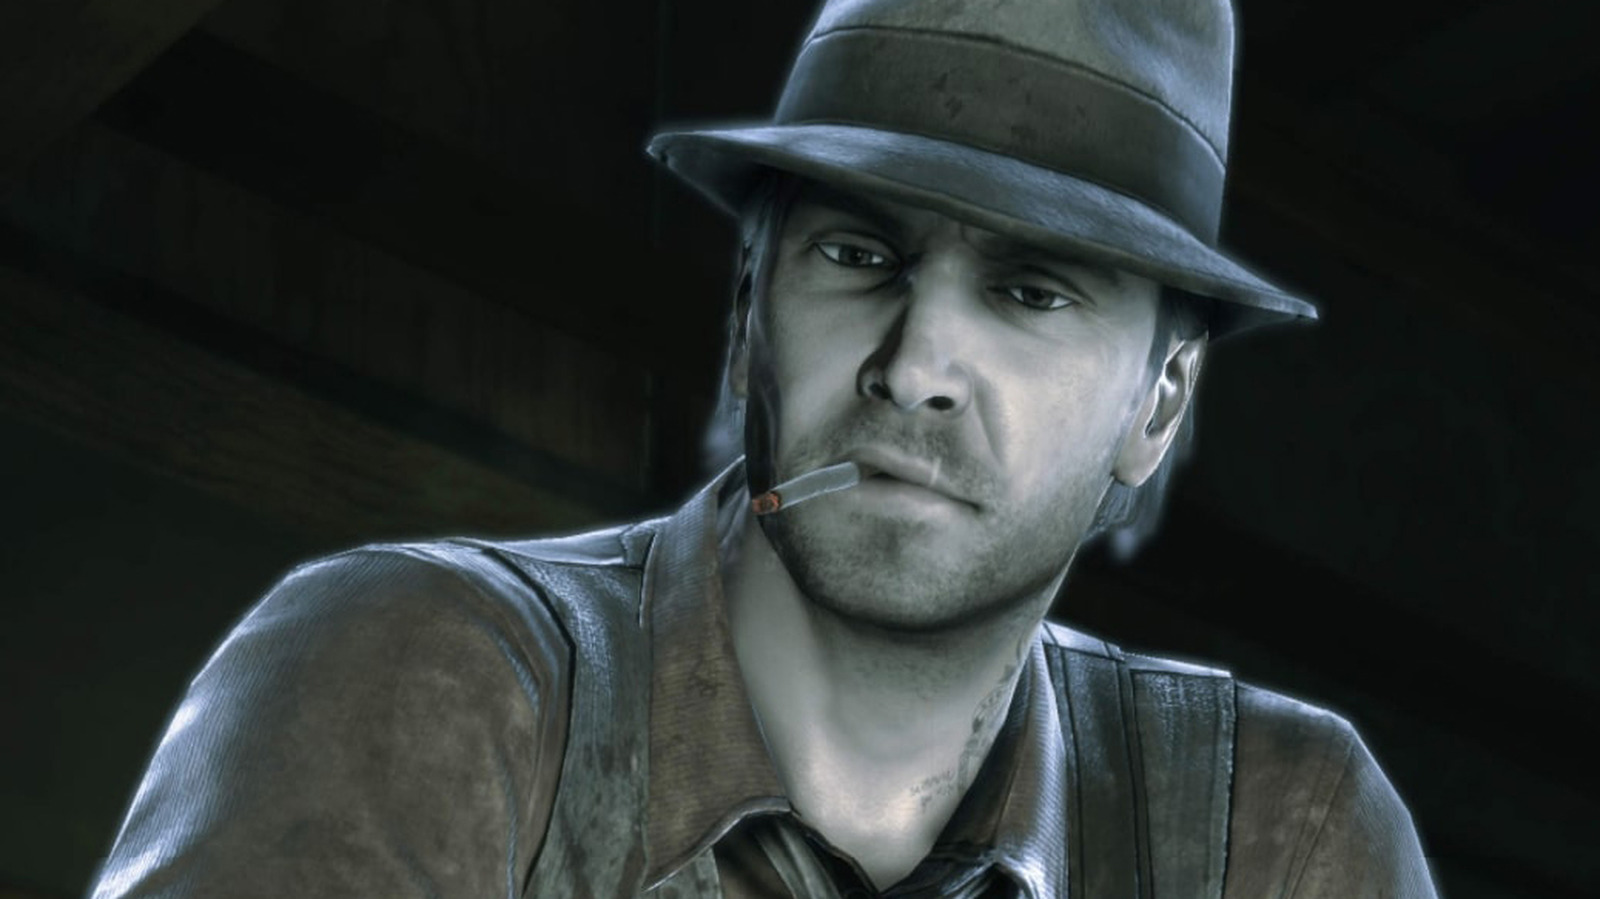 Why Murdered: Soul Suspect Was Such A Huge Flop For Square Enix